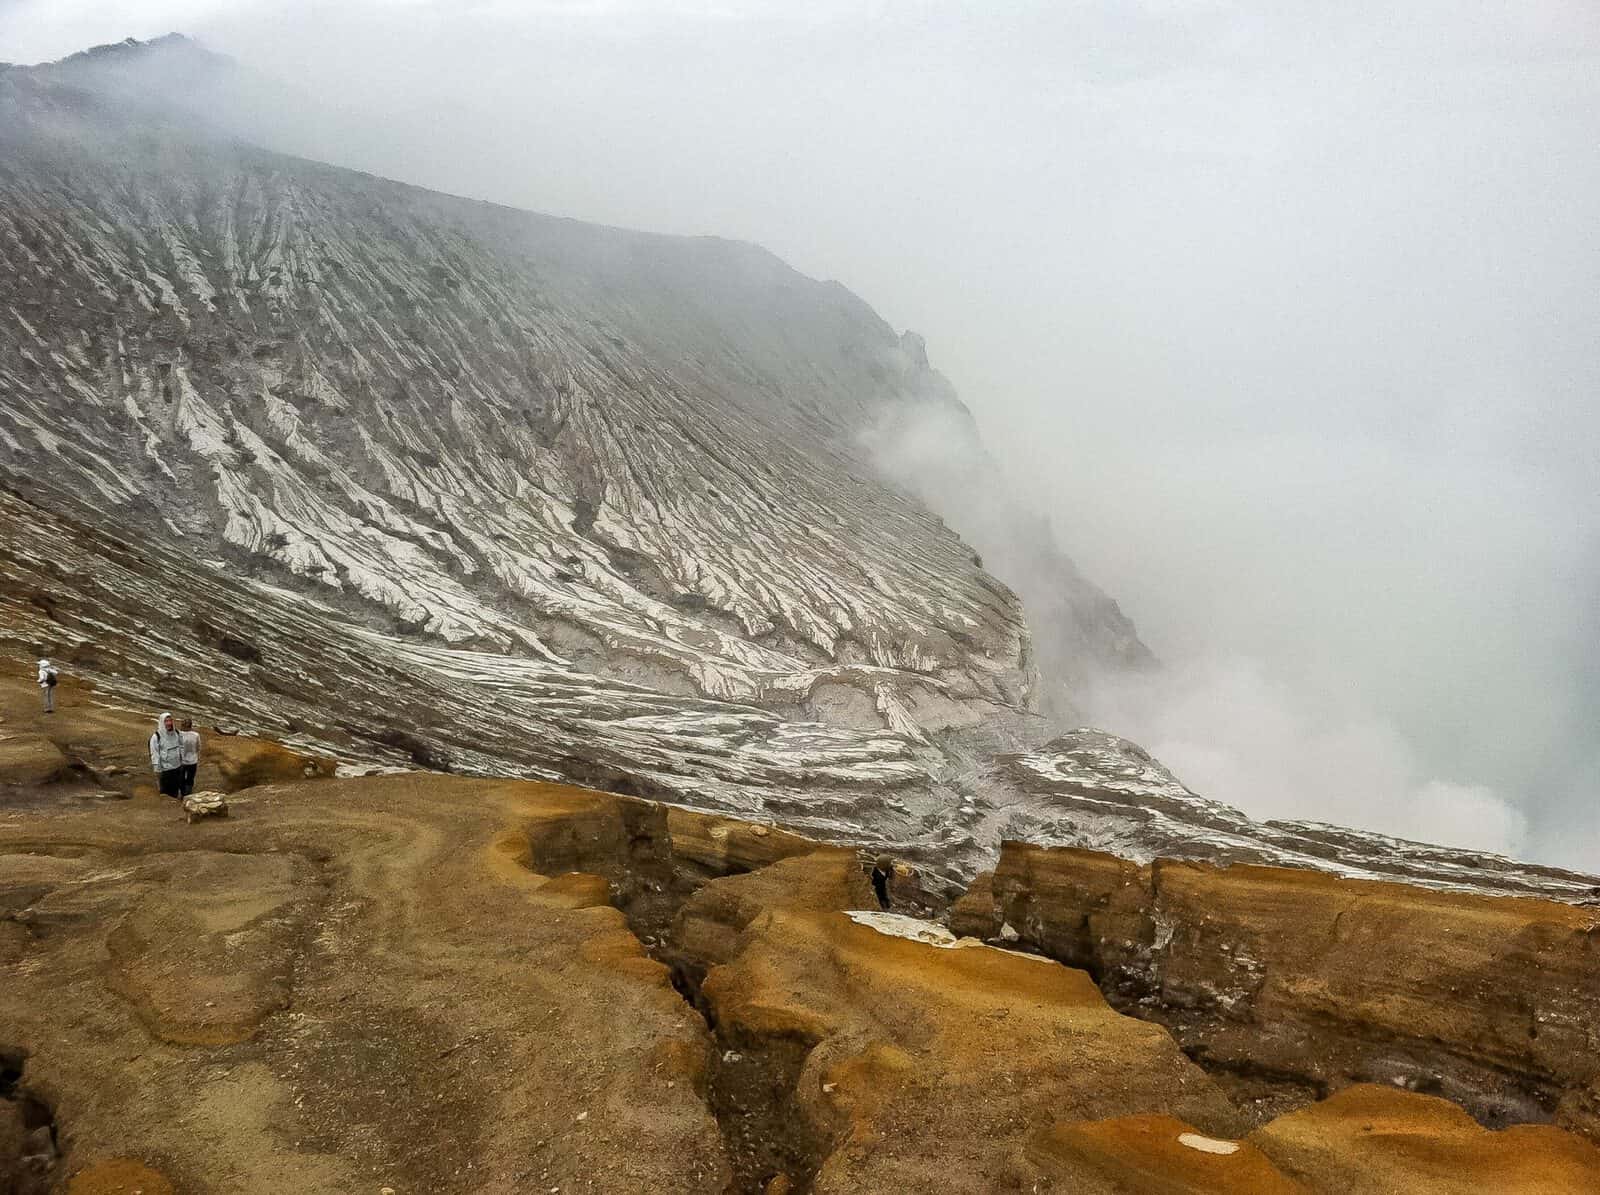 Going on Ijen tour is one of the best things to do